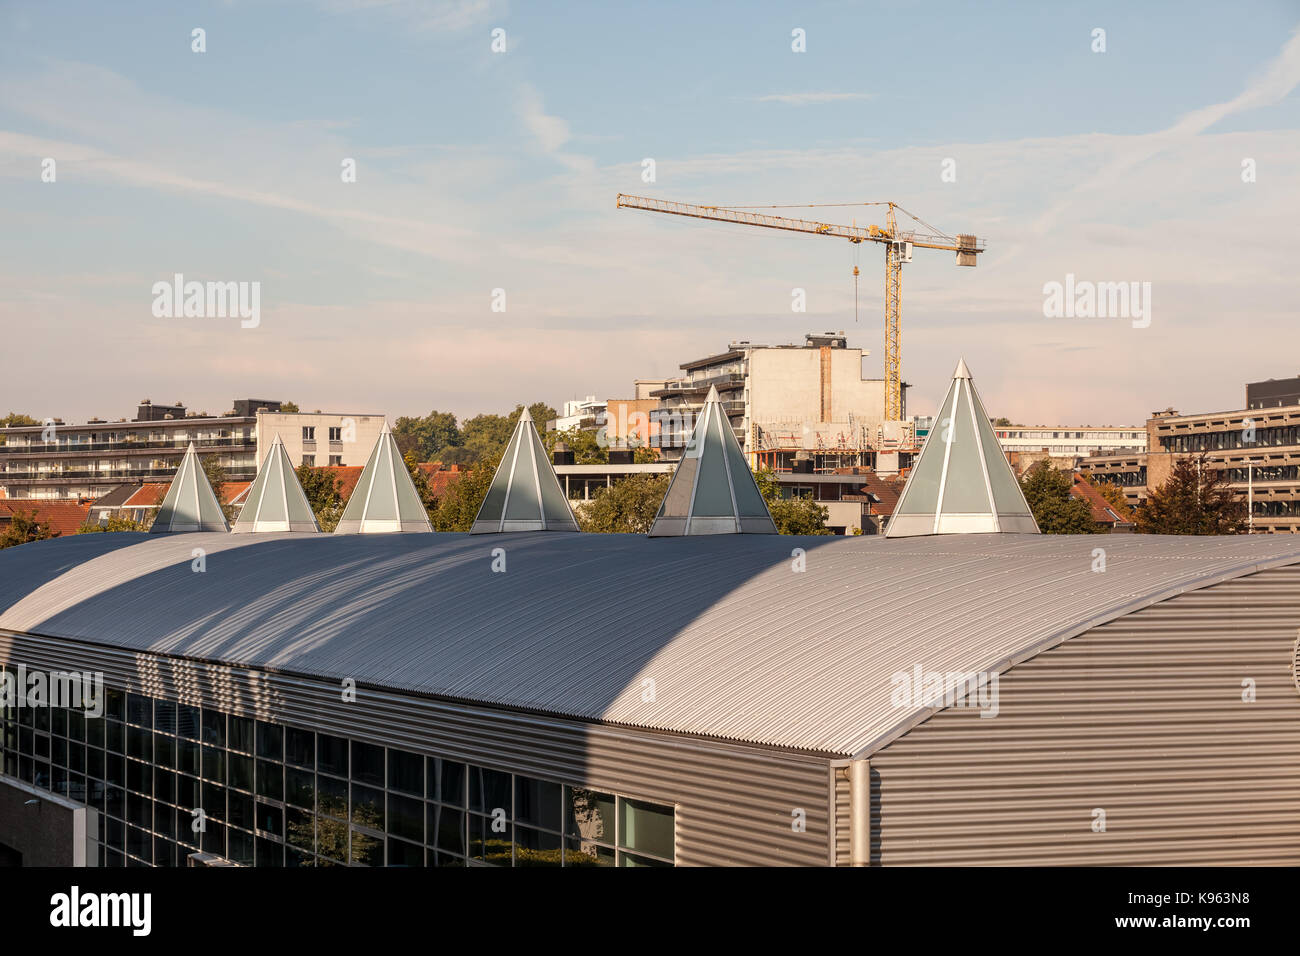 Plastic Dome in a row on a metal roof Stock Photo